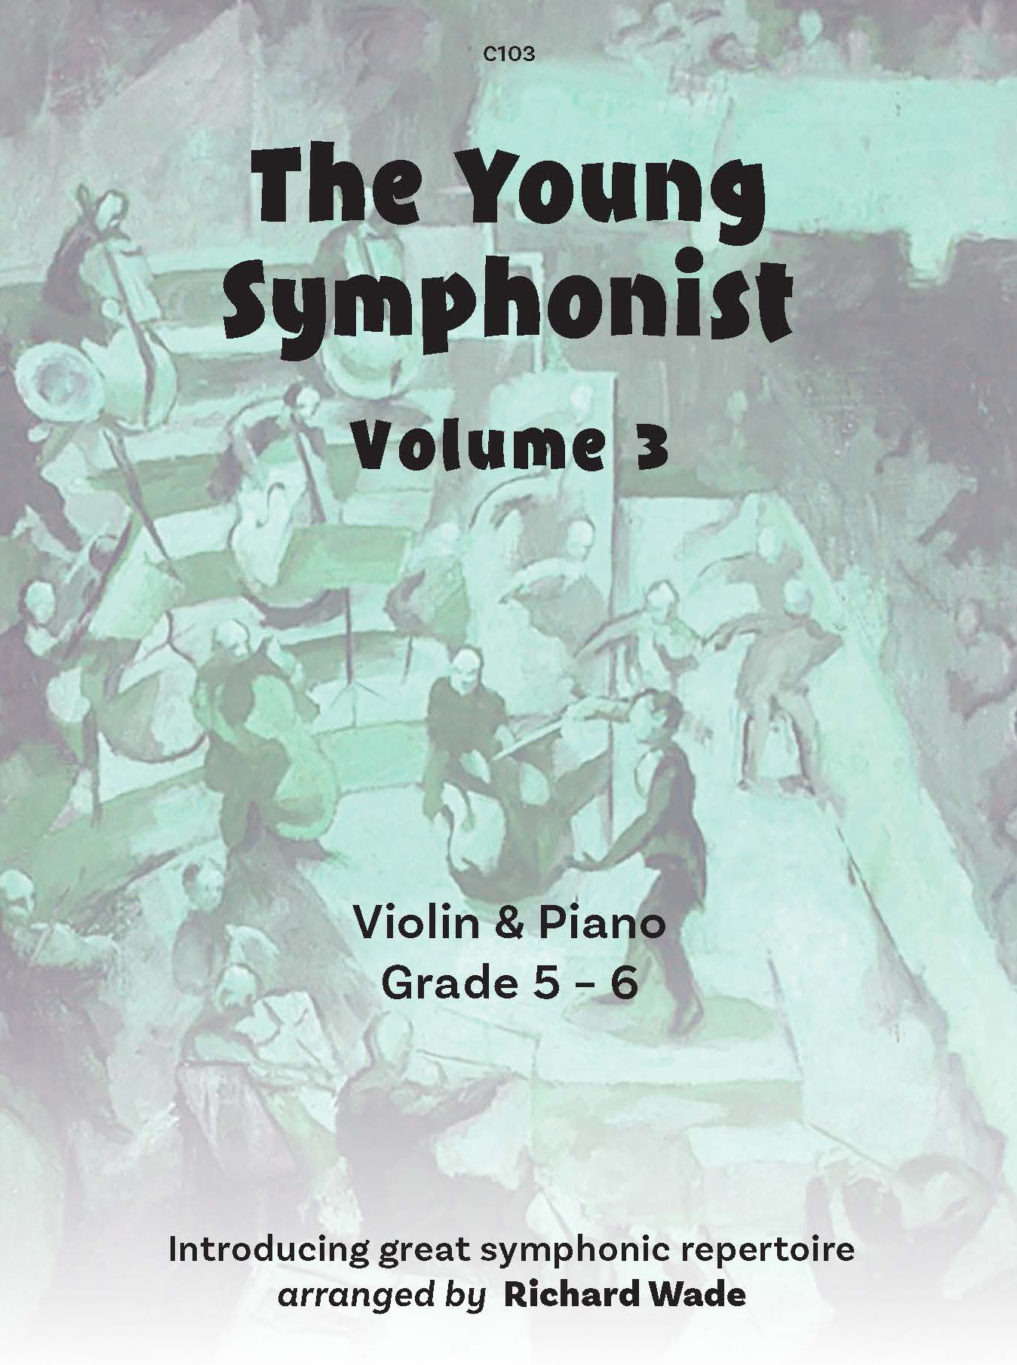 Young Symphonist Vol 3 Wade Violin & Piano Sheet Music Songbook